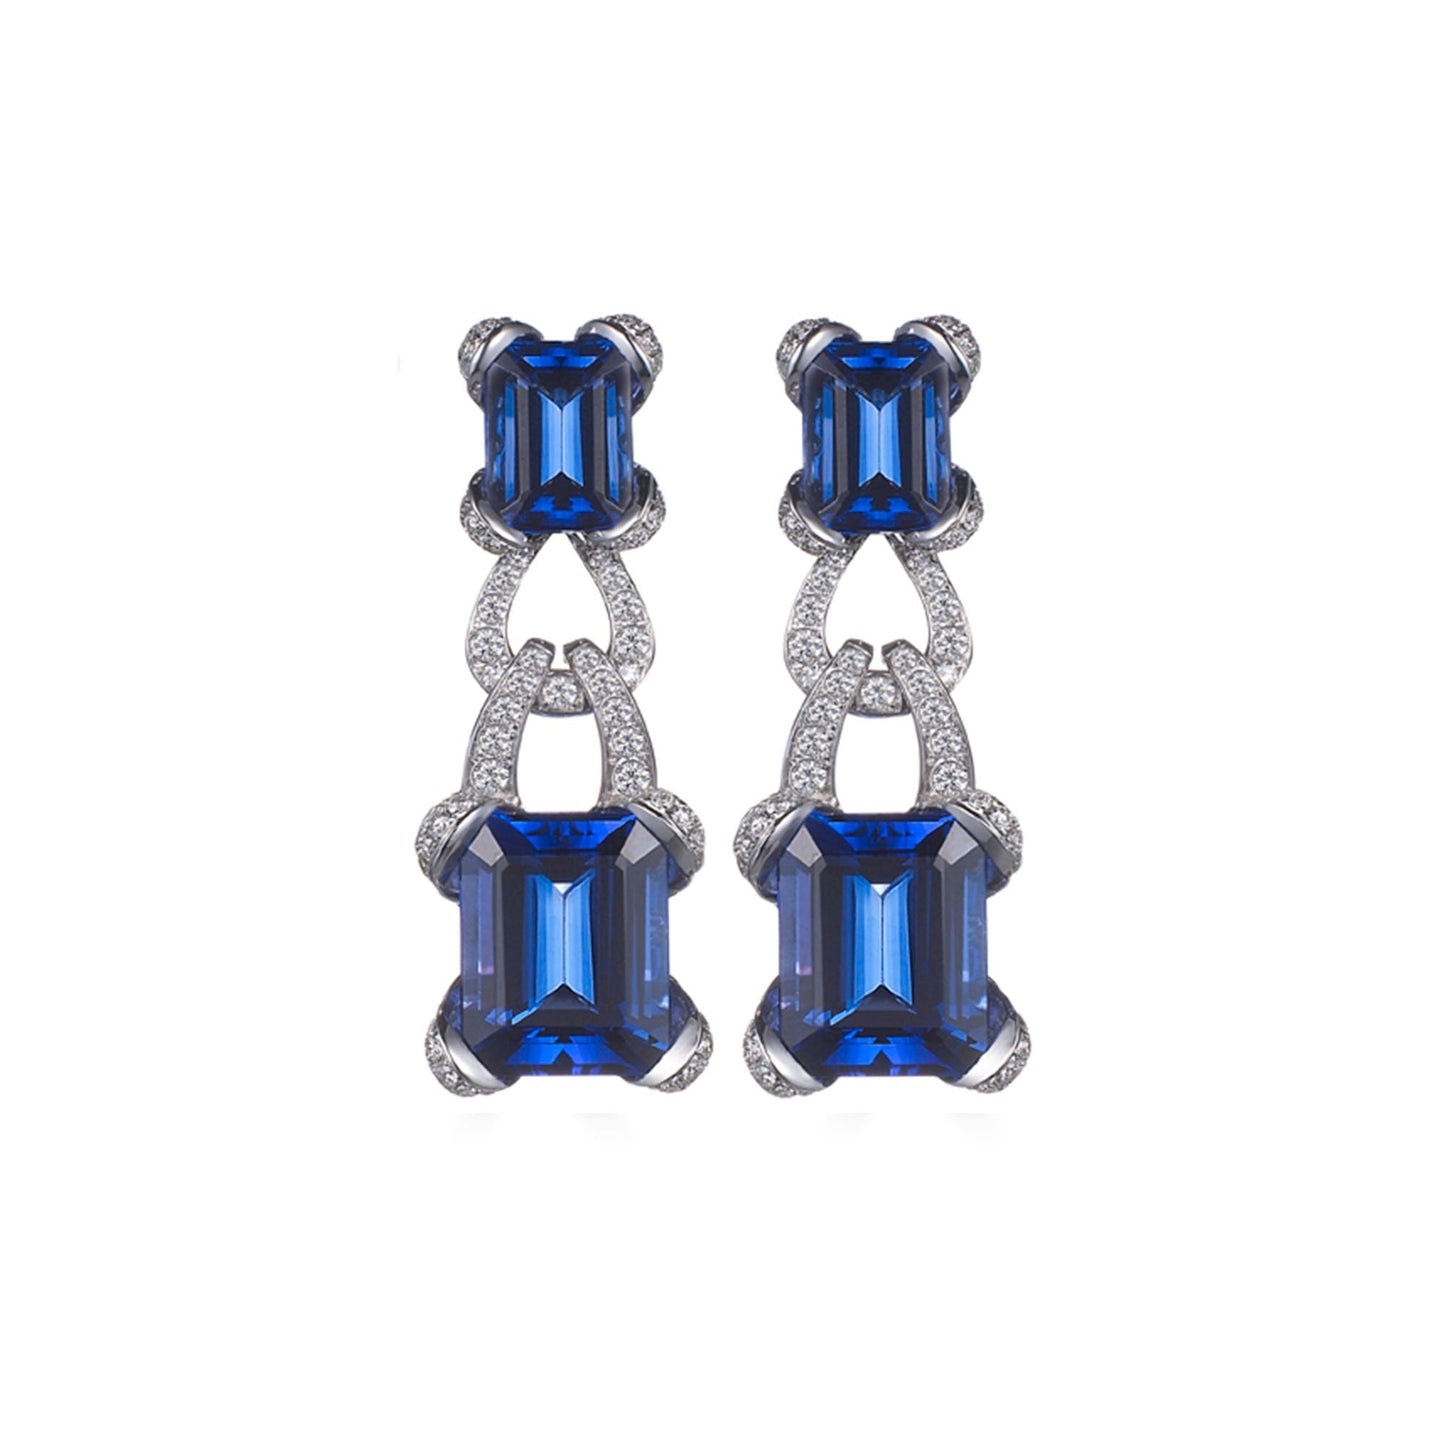 Ribbon Earrings in 18ct White Gold with Tanzanite and Diamonds